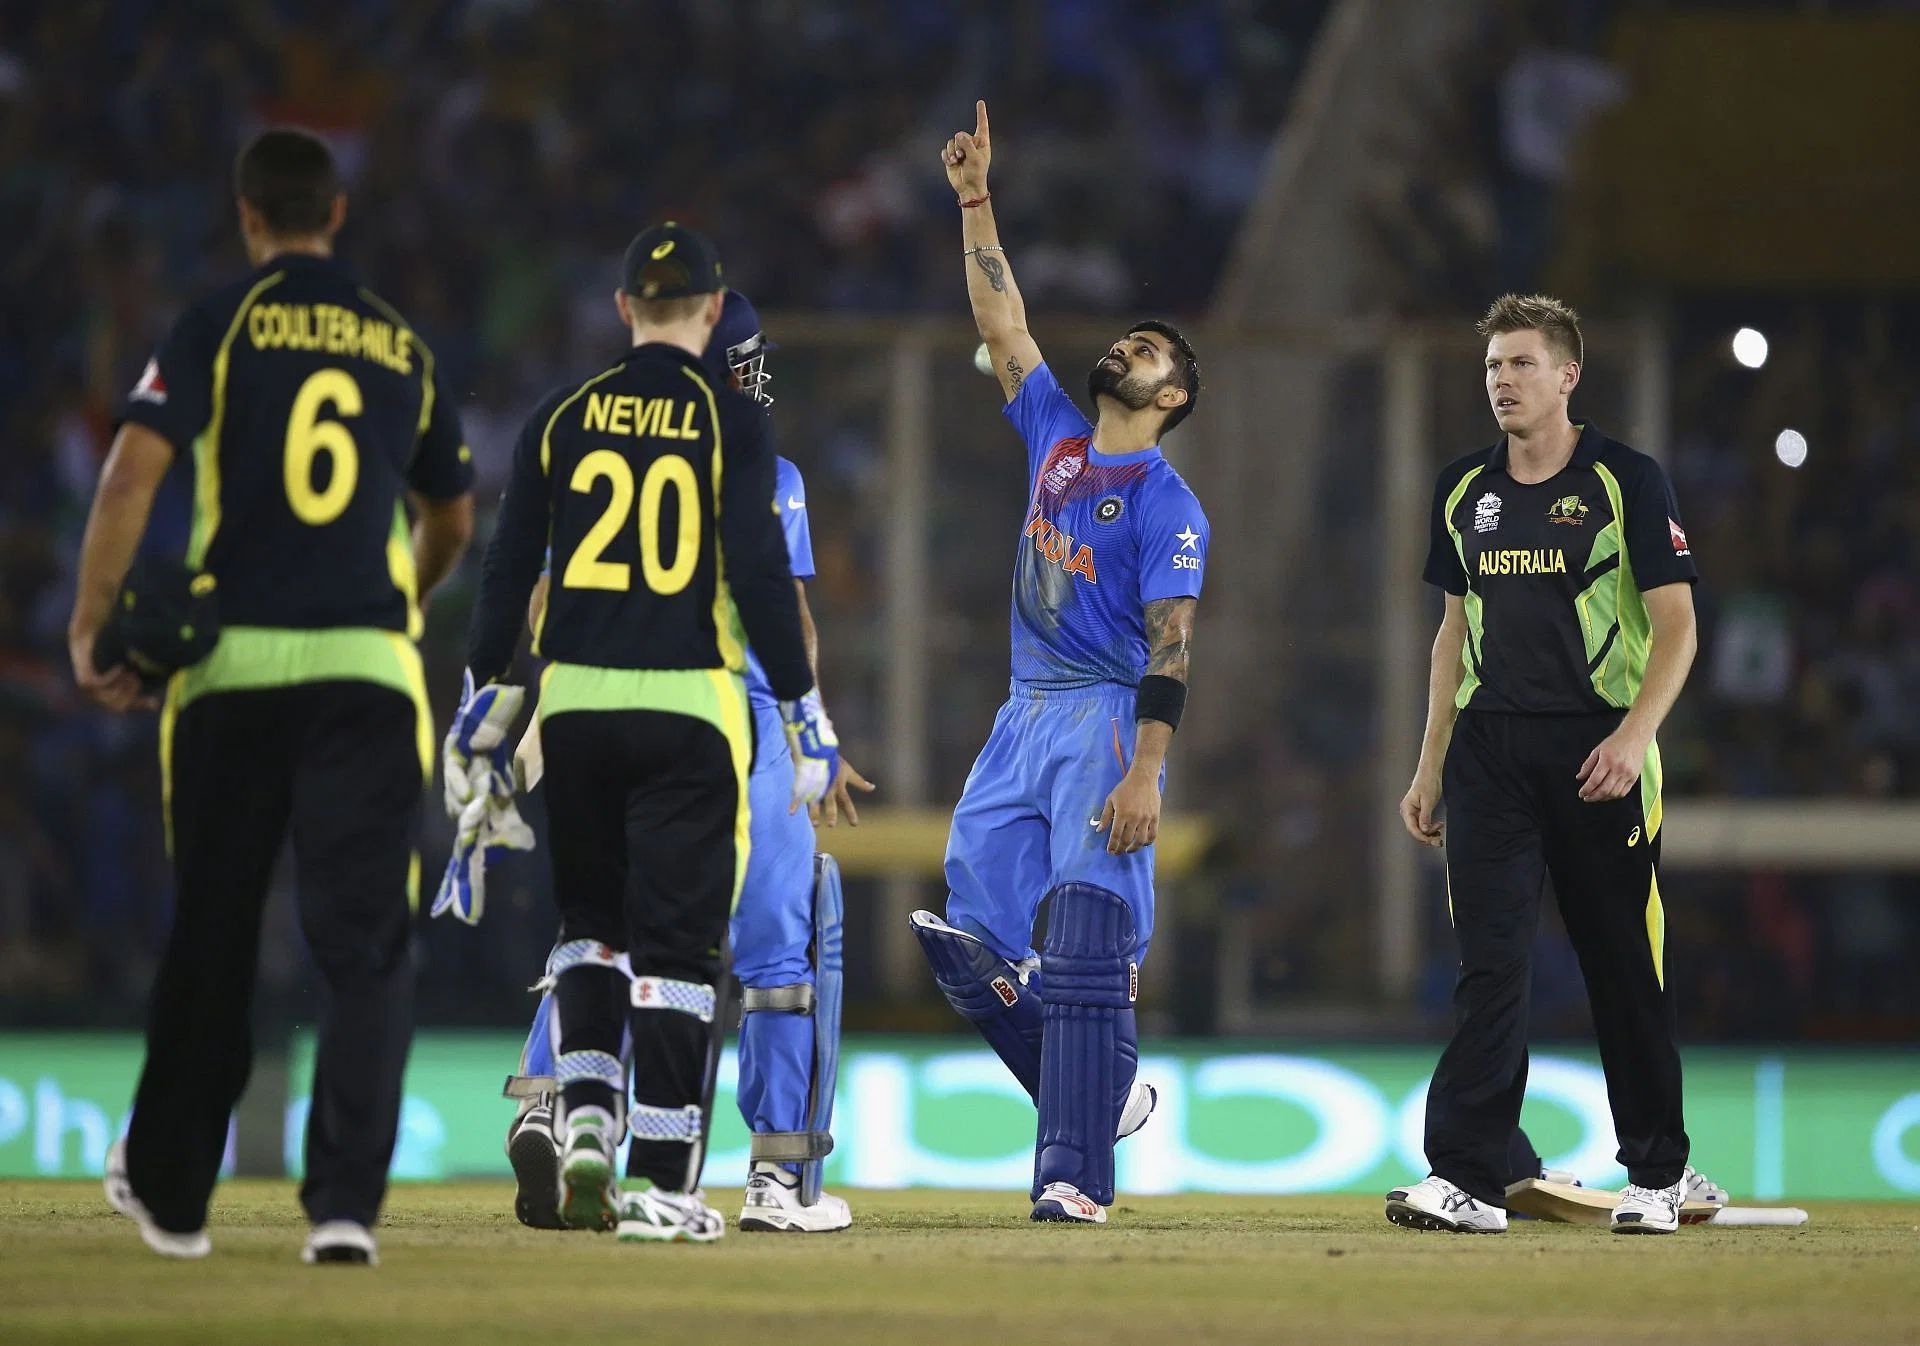 The master chaser scored a top-class 82* off 51 balls as Team India gunned down a target of 161 against Australia in the 2016 T20 World Cup Super 10 clash in Mohali. With the win, the Men in Blue also sealed their berth in the semis. (Pic: Getty Images)